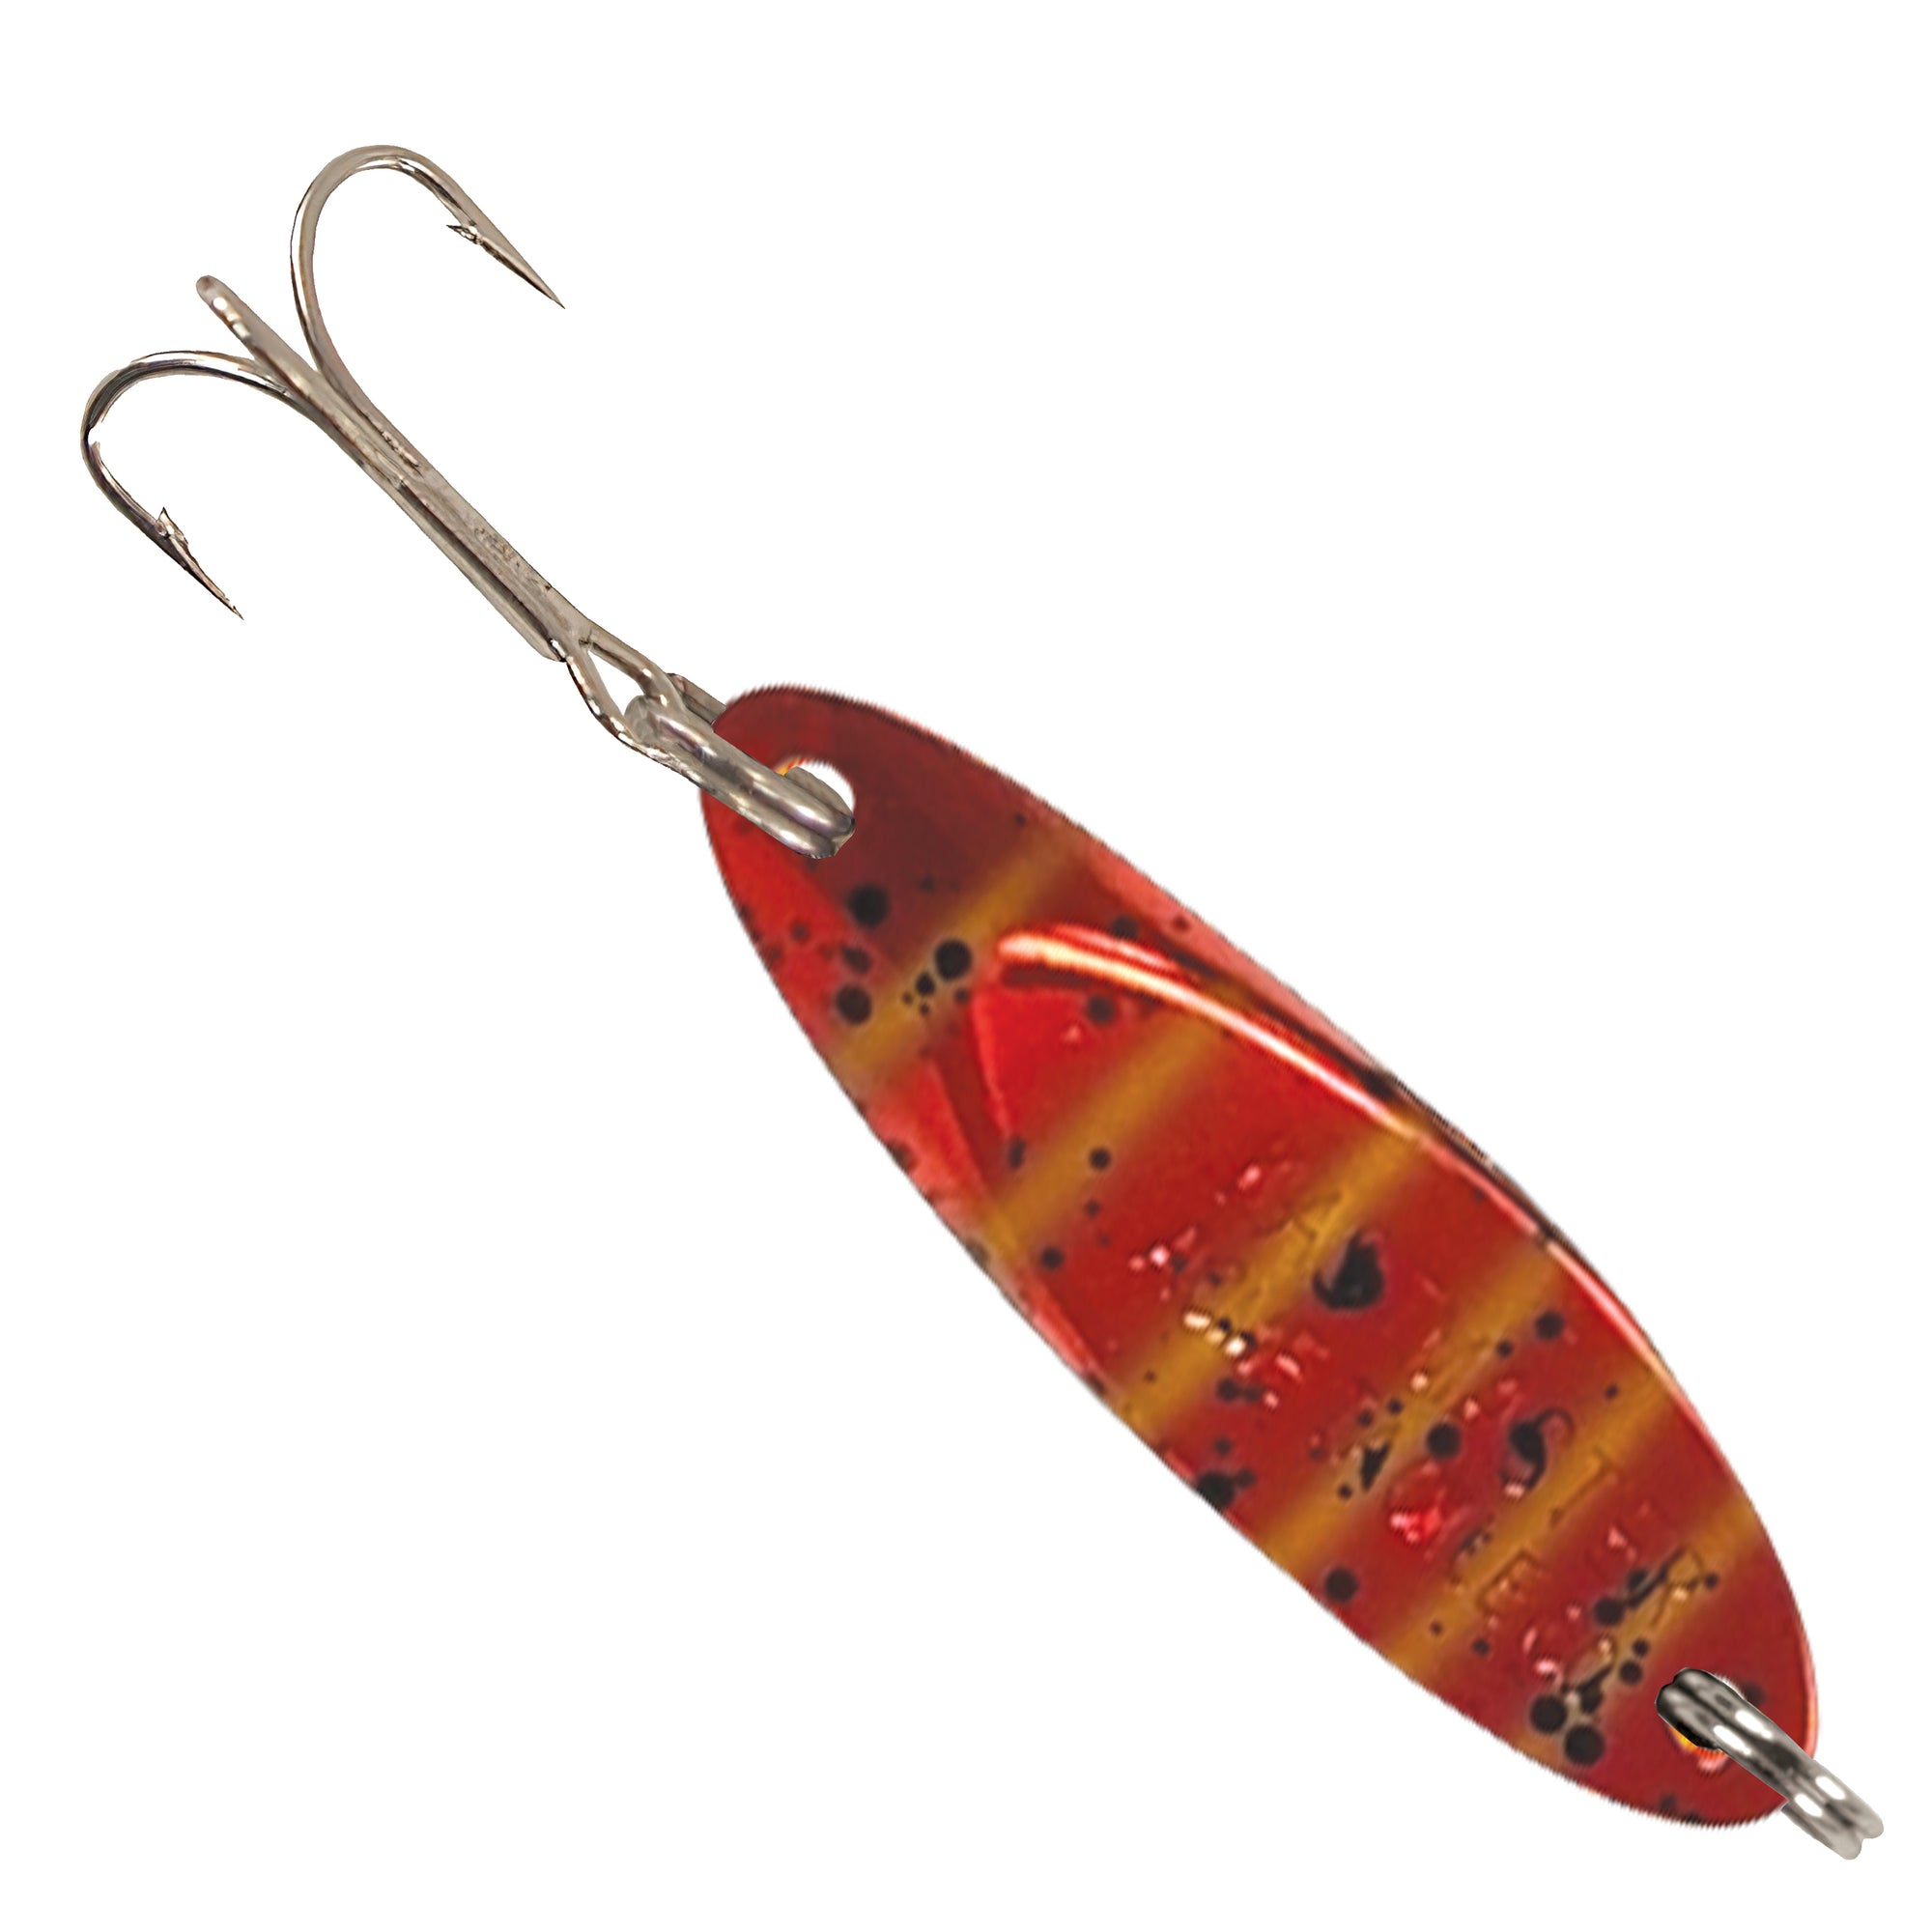 Acme Tackle Kastmaster Rattle Lure Fishing Lure Spoon Gold 1/4 oz